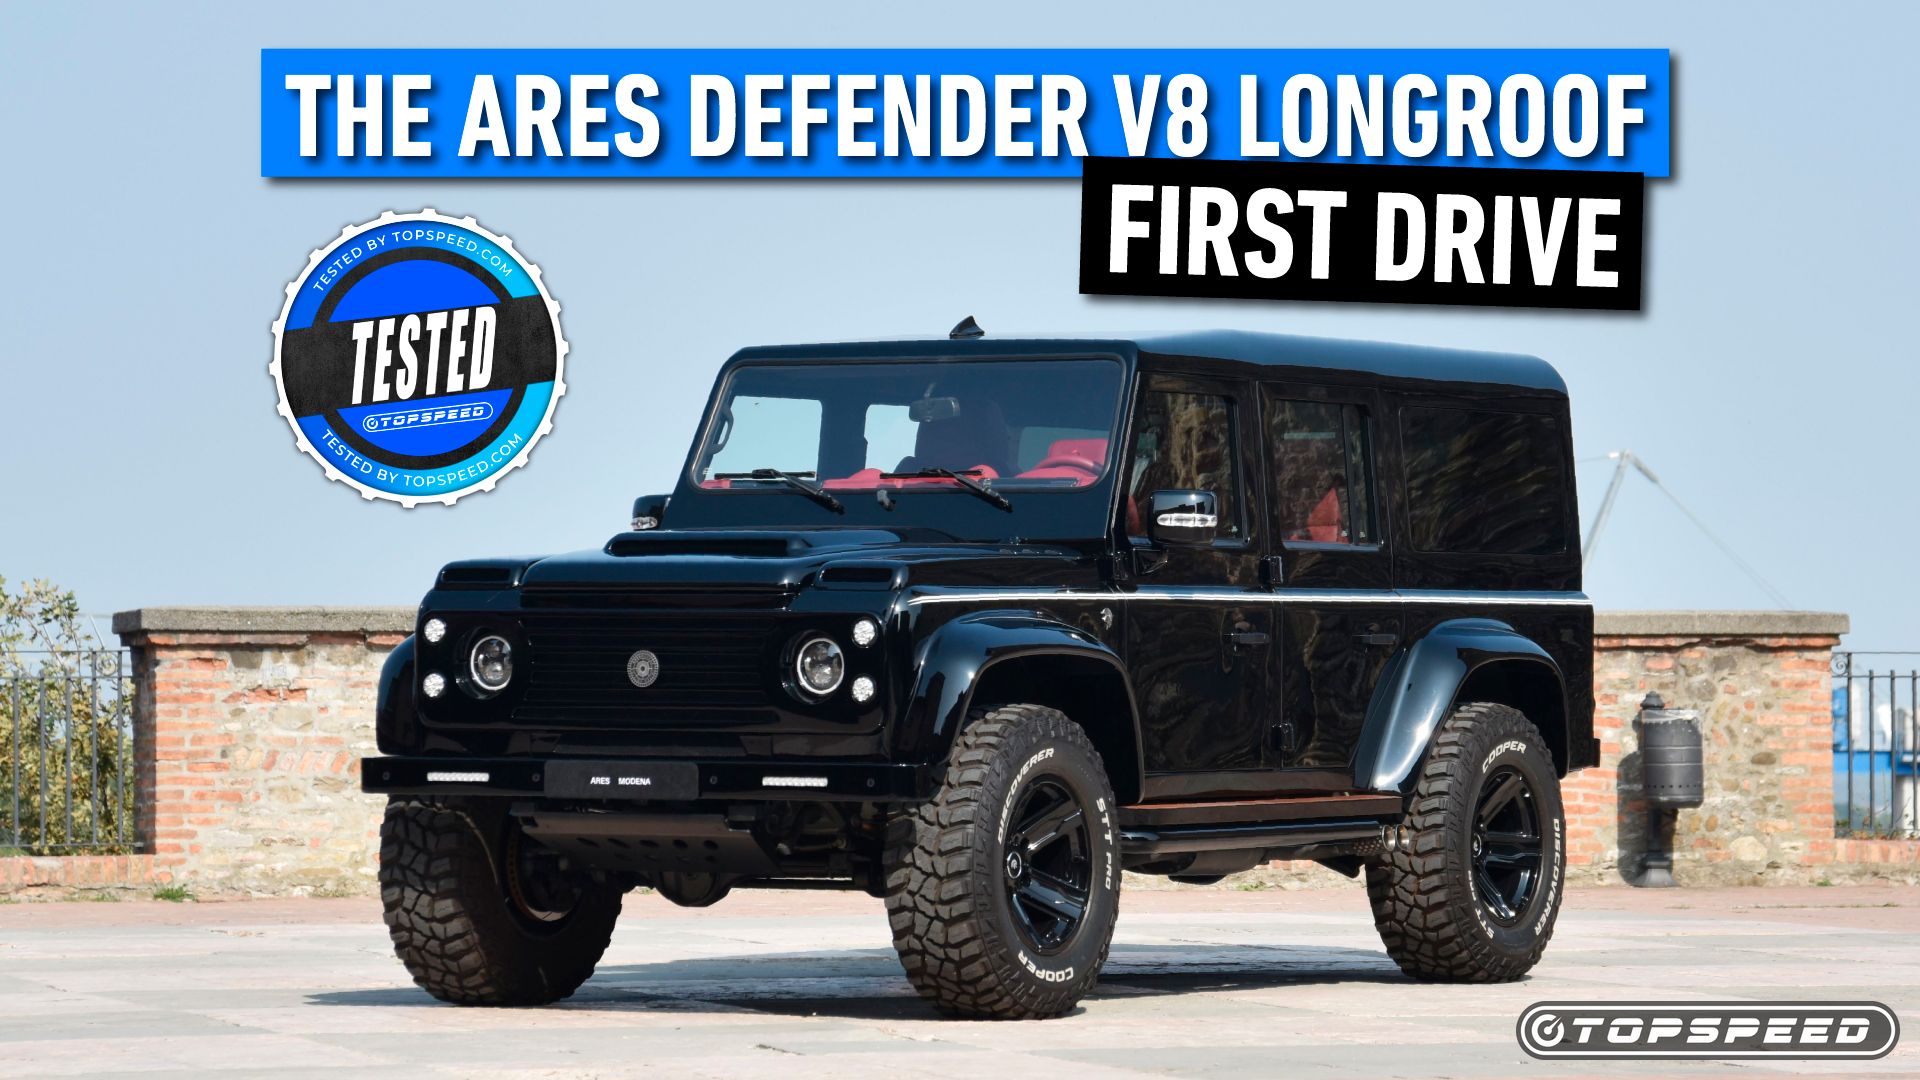 First-Drive-The-Ares-Defender-V8-Longroof-Is-A-Giantic-Big-Toy-1